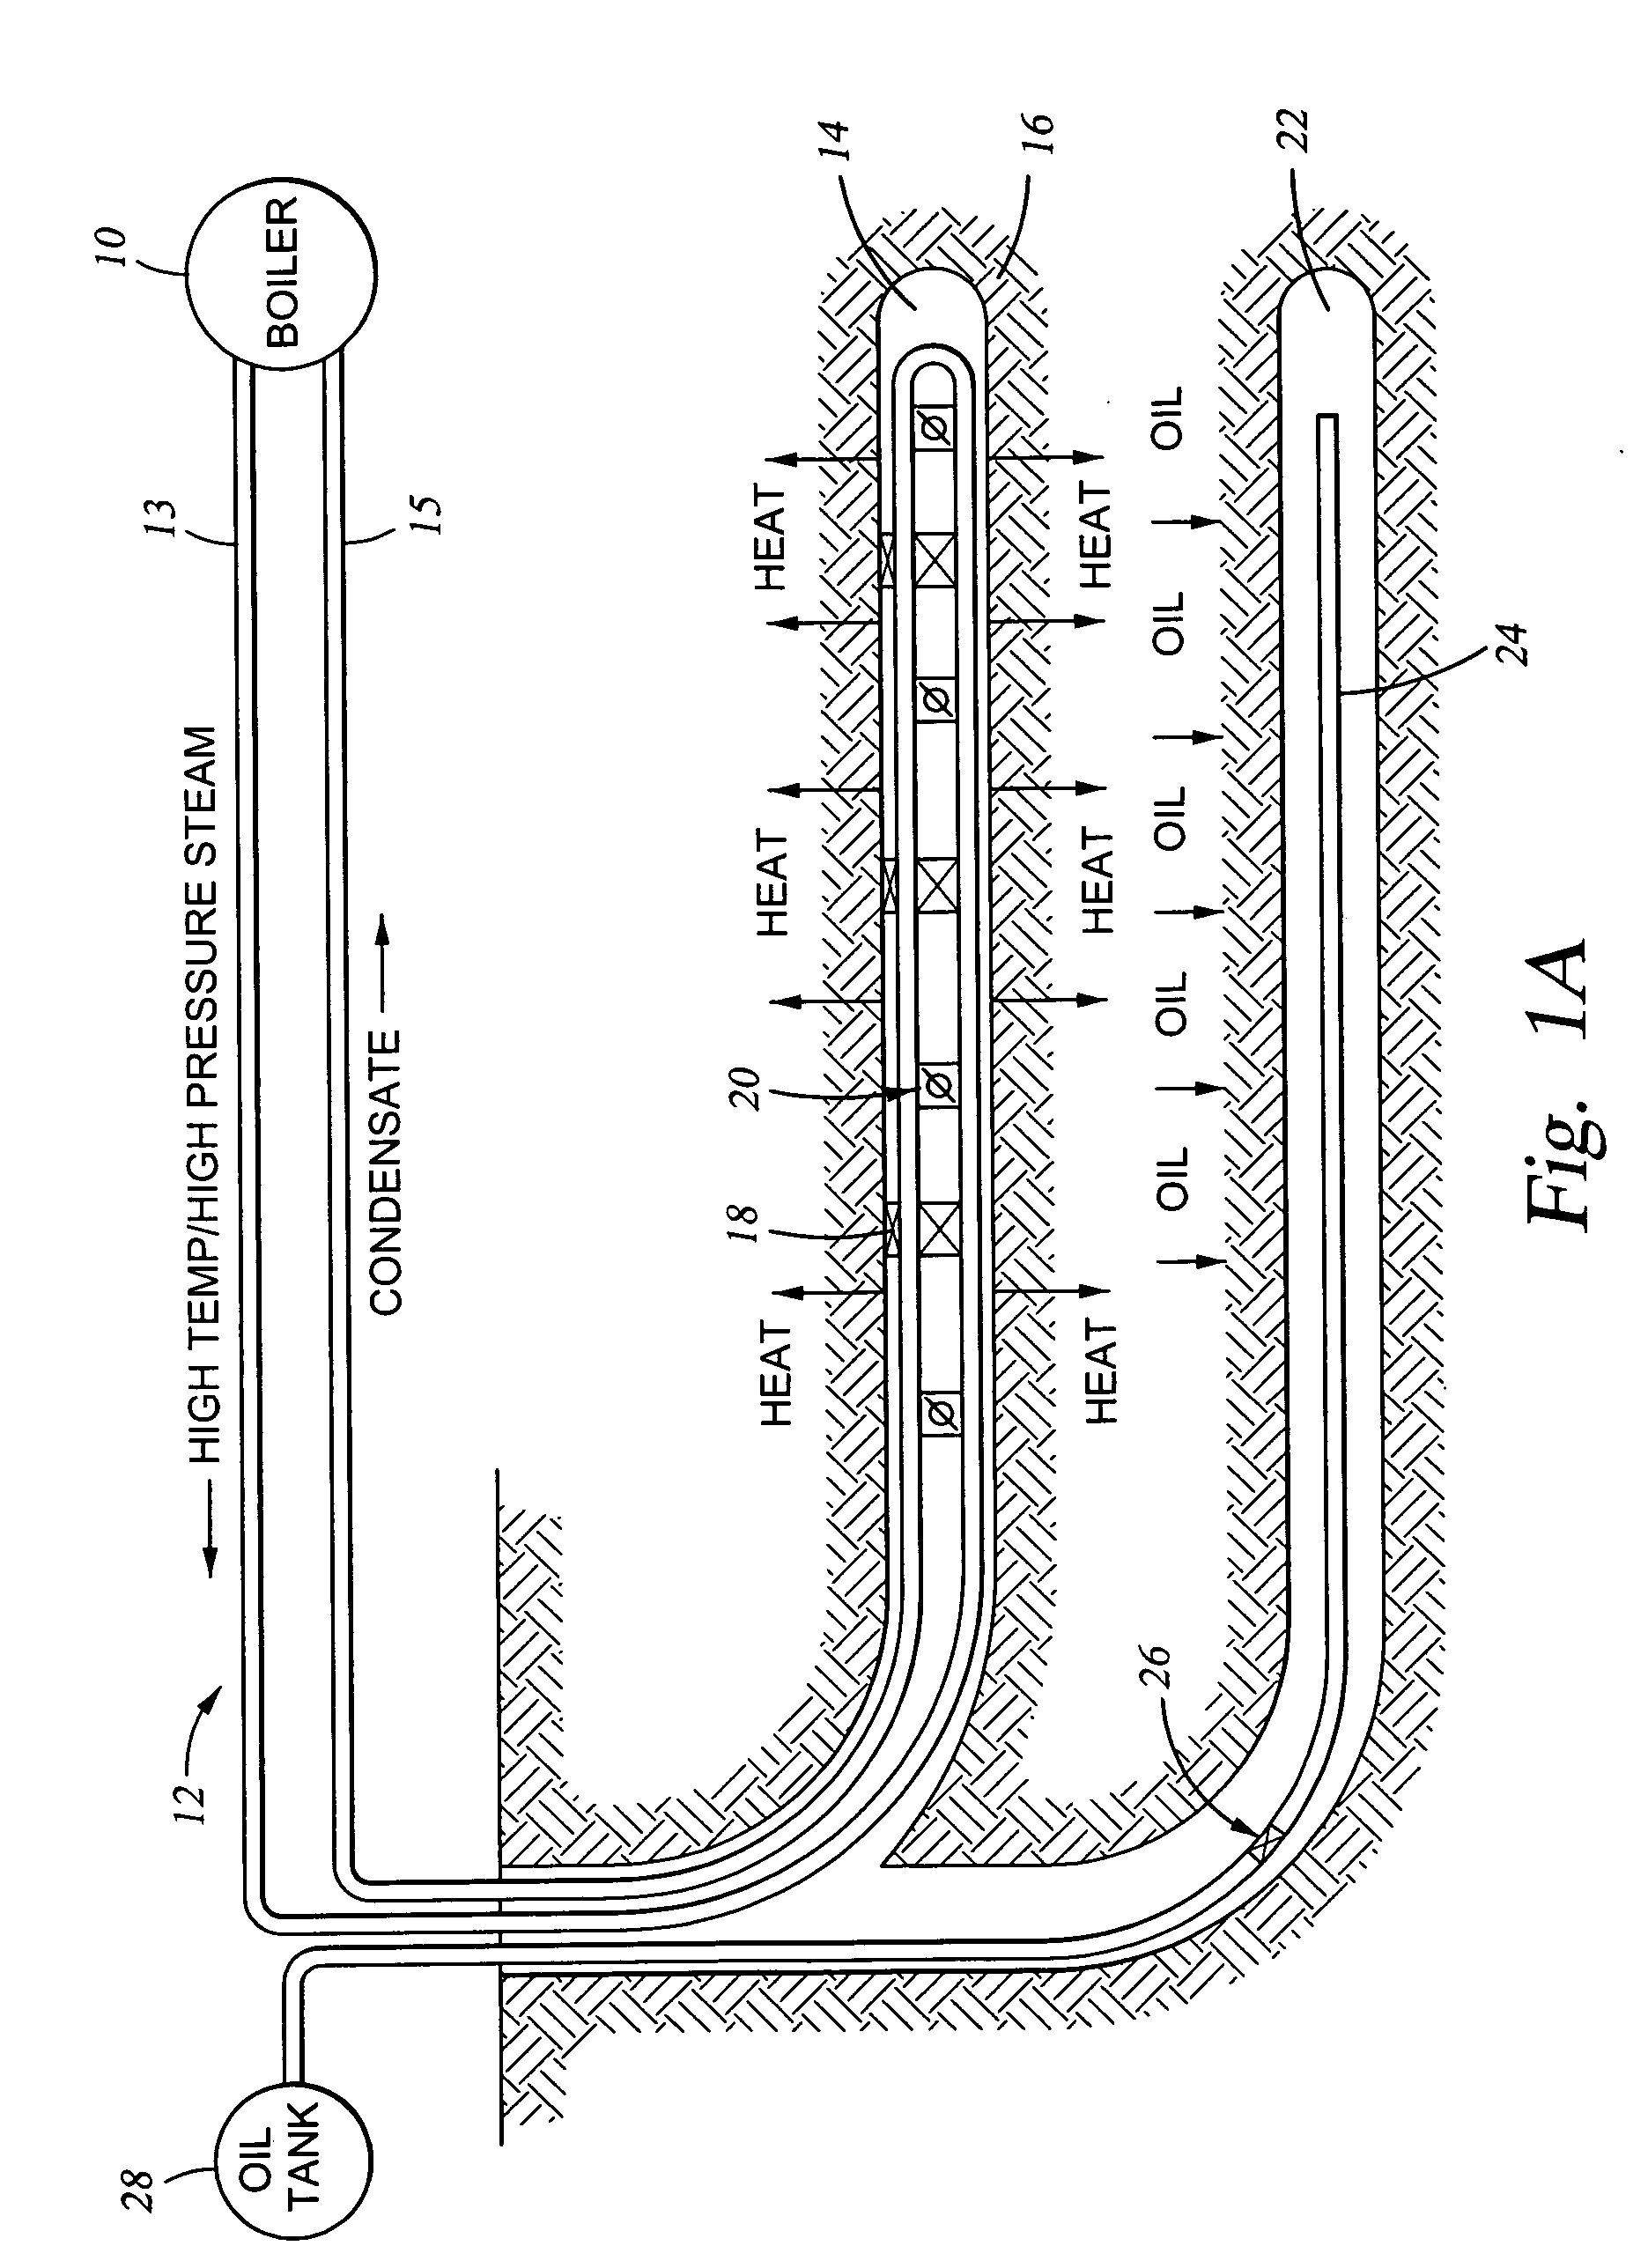 Loop systems and methods of using the same for conveying and distributing thermal energy into a wellbore